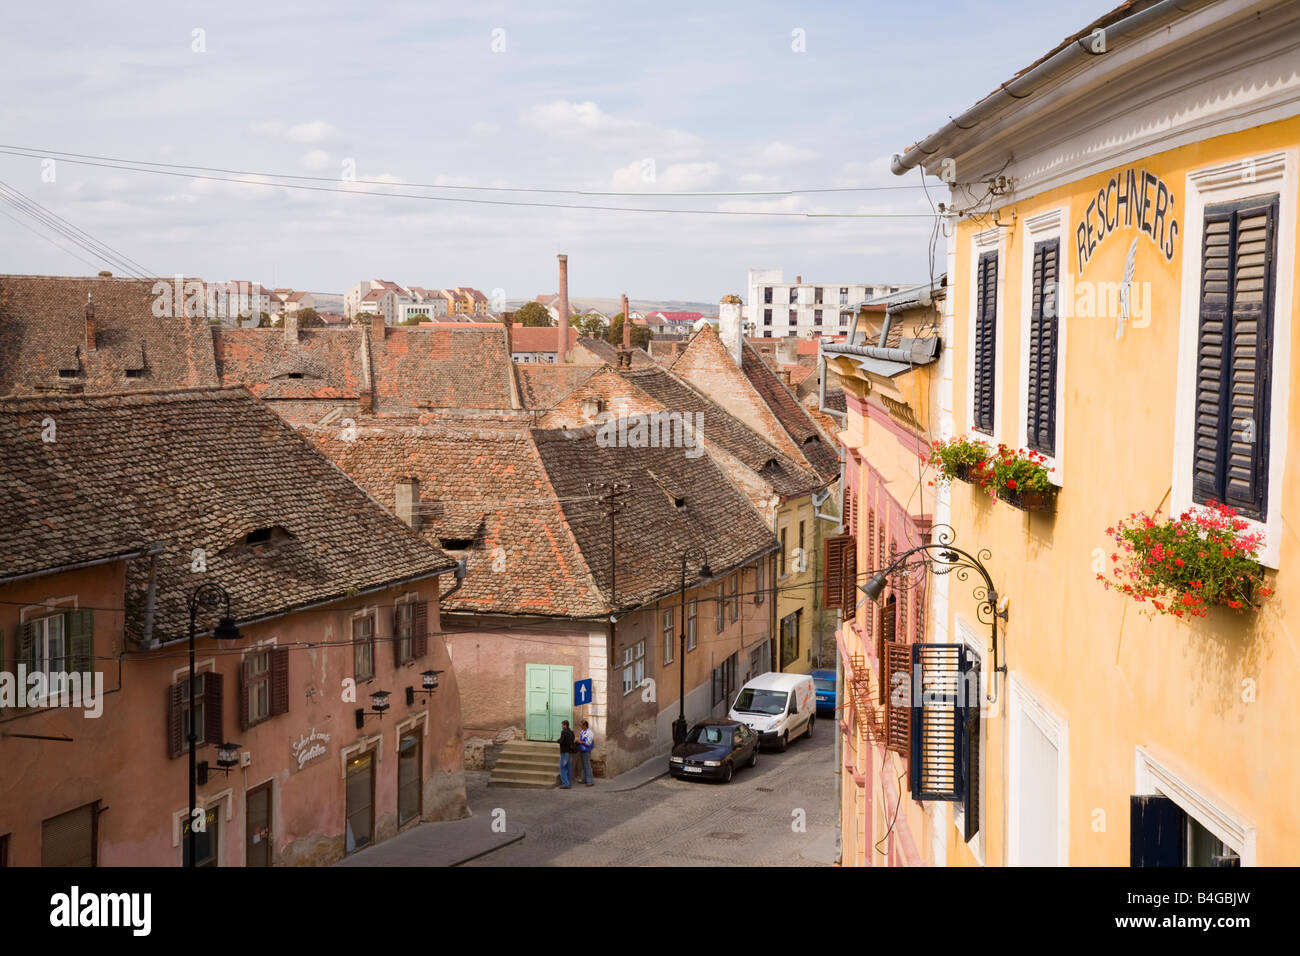 Sibiu Transylvania Romania Europe Old buildings and tiled rooftops in Strada Ocnei street in historic city centre Stock Photo